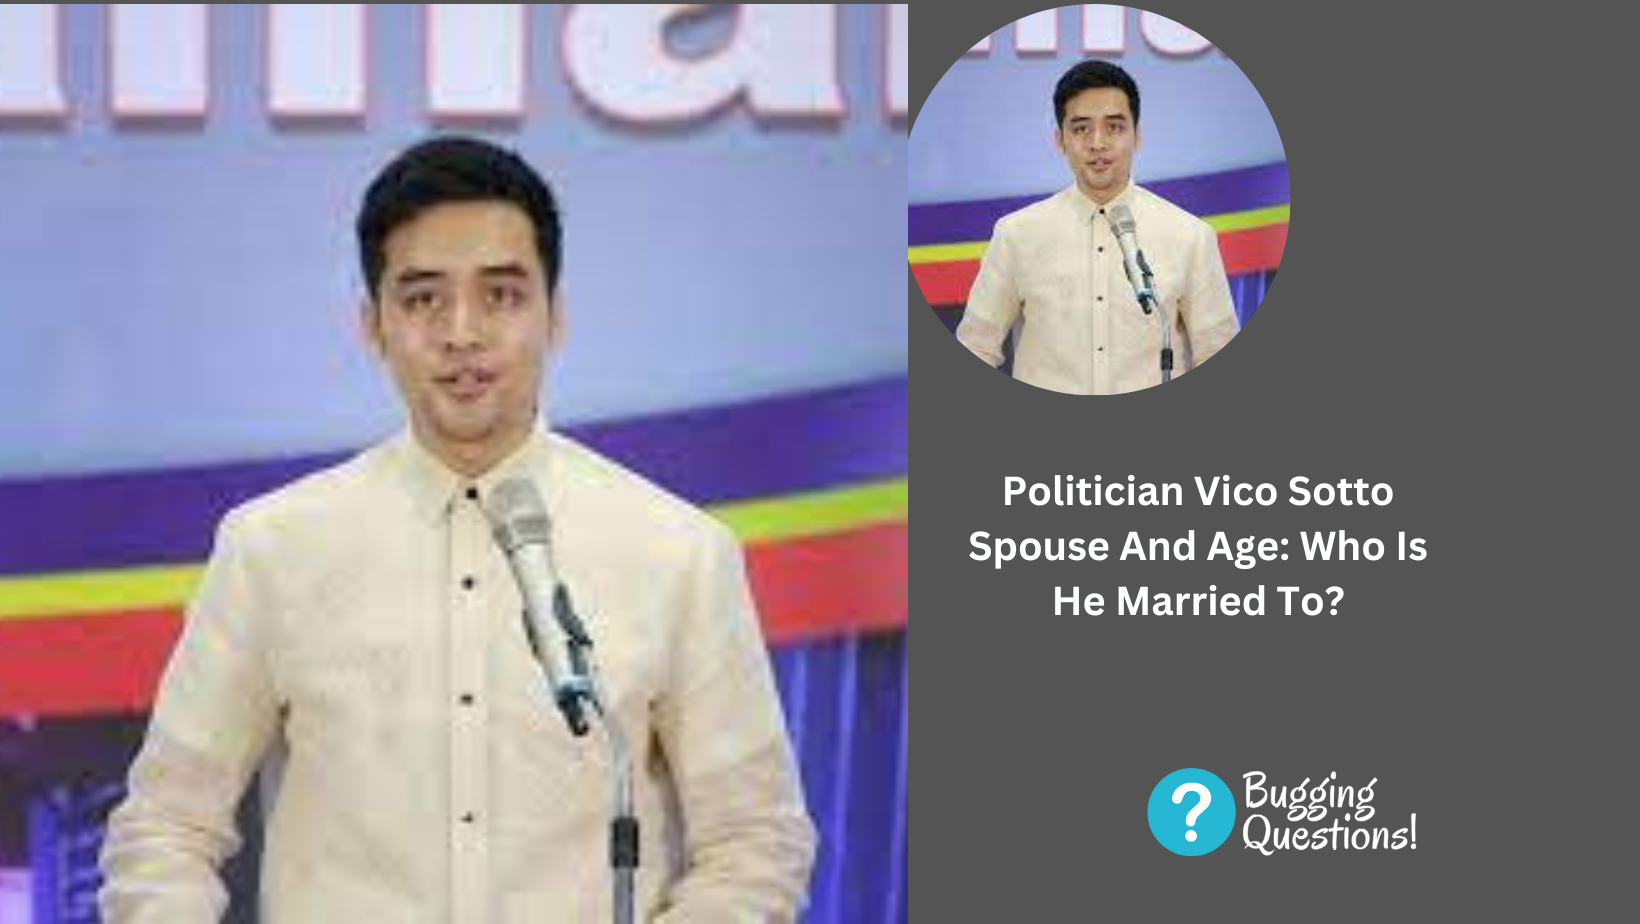 Politician Vico Sotto Spouse And Age: Who Is He Married To?